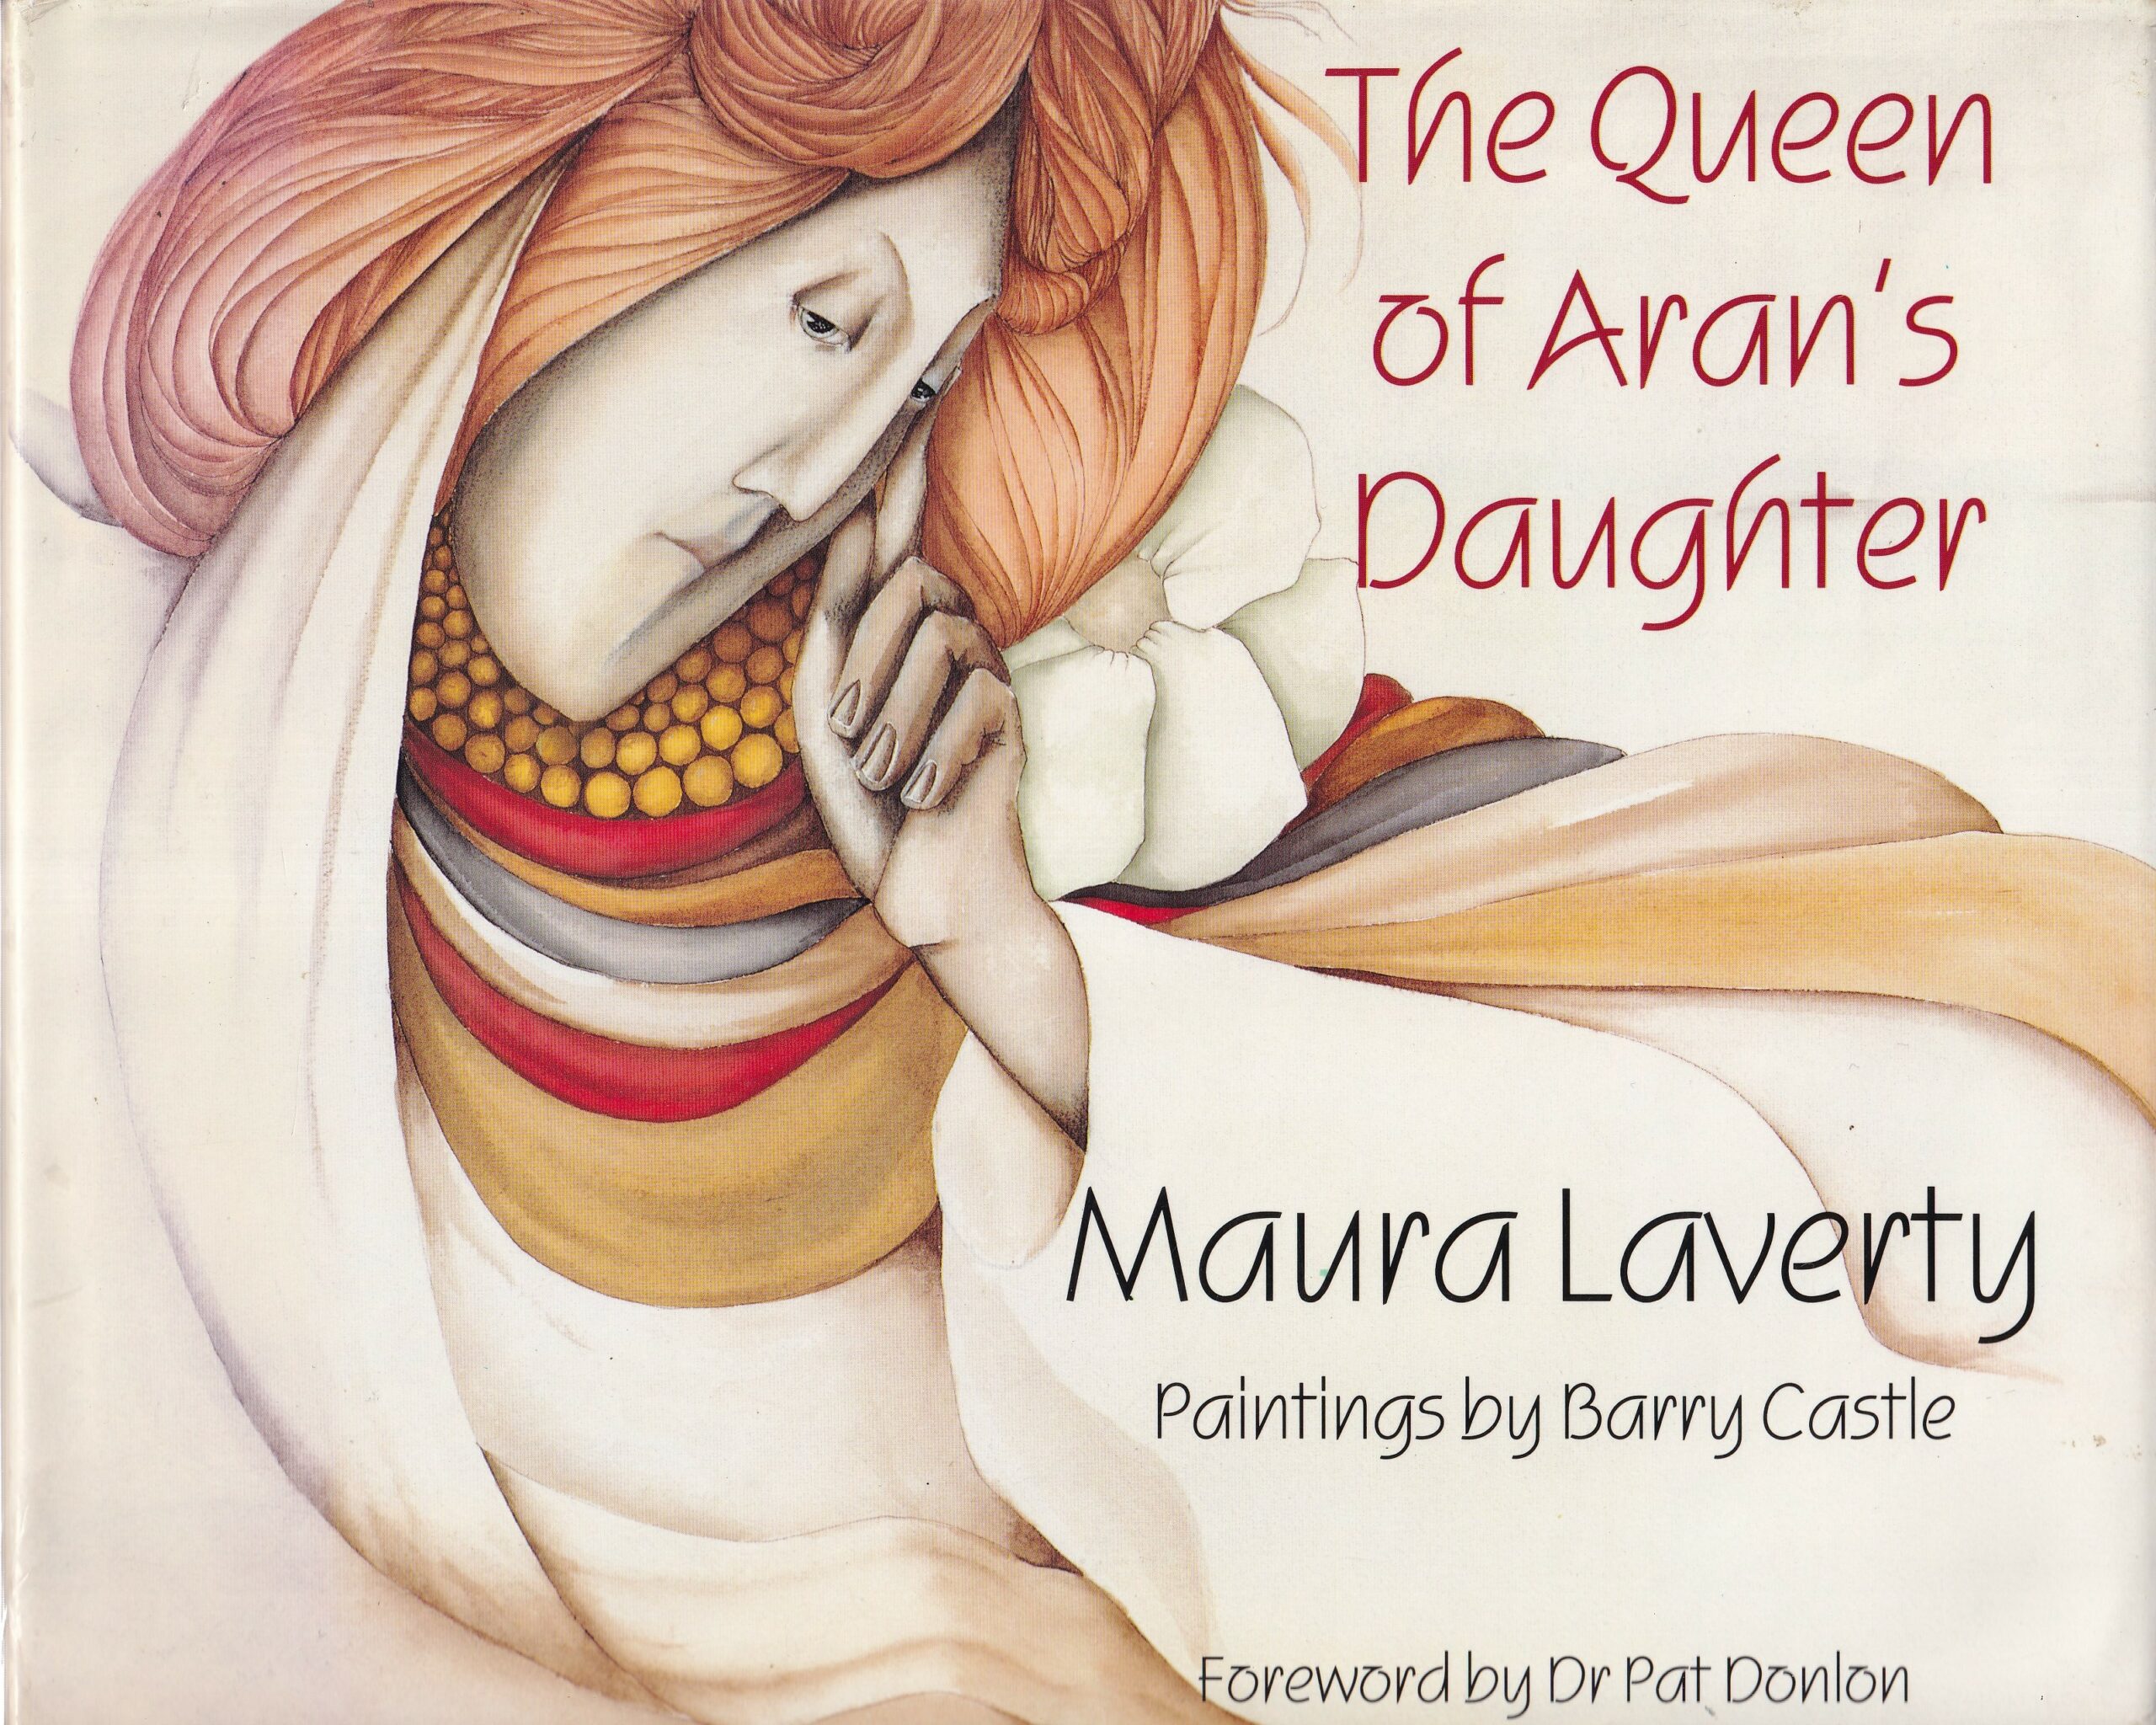 The Queen of Aran’s Daughter by Maura Laverty